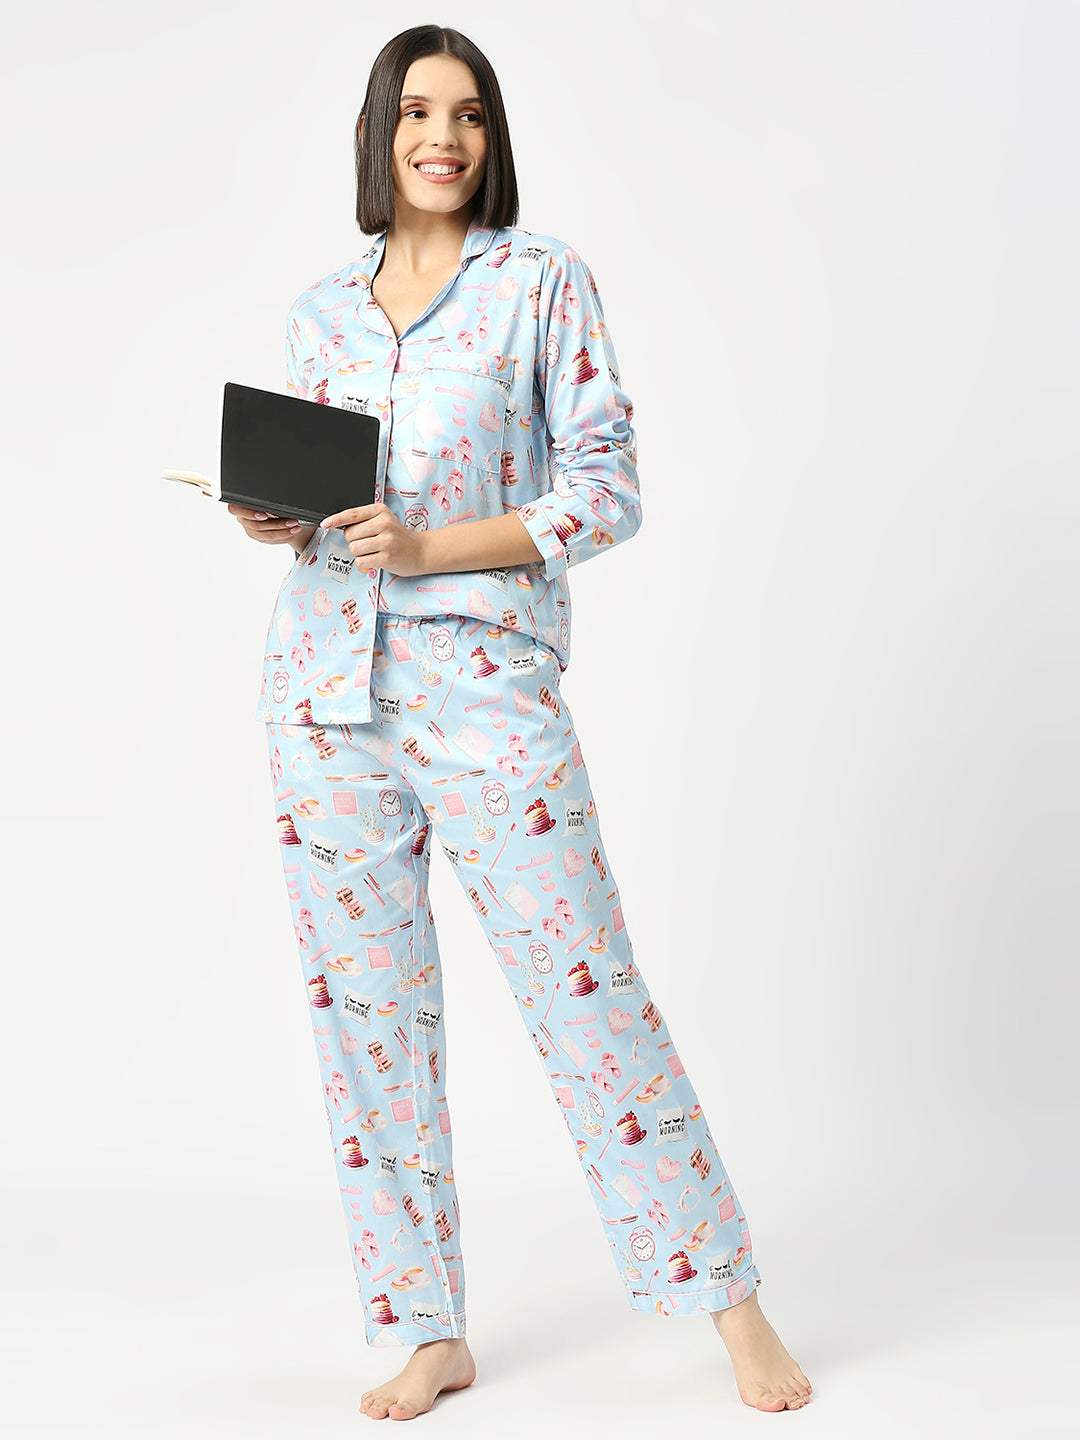 Good Morning Button Down Pj Set - Pure Cotton Pj Set with Notched Collar